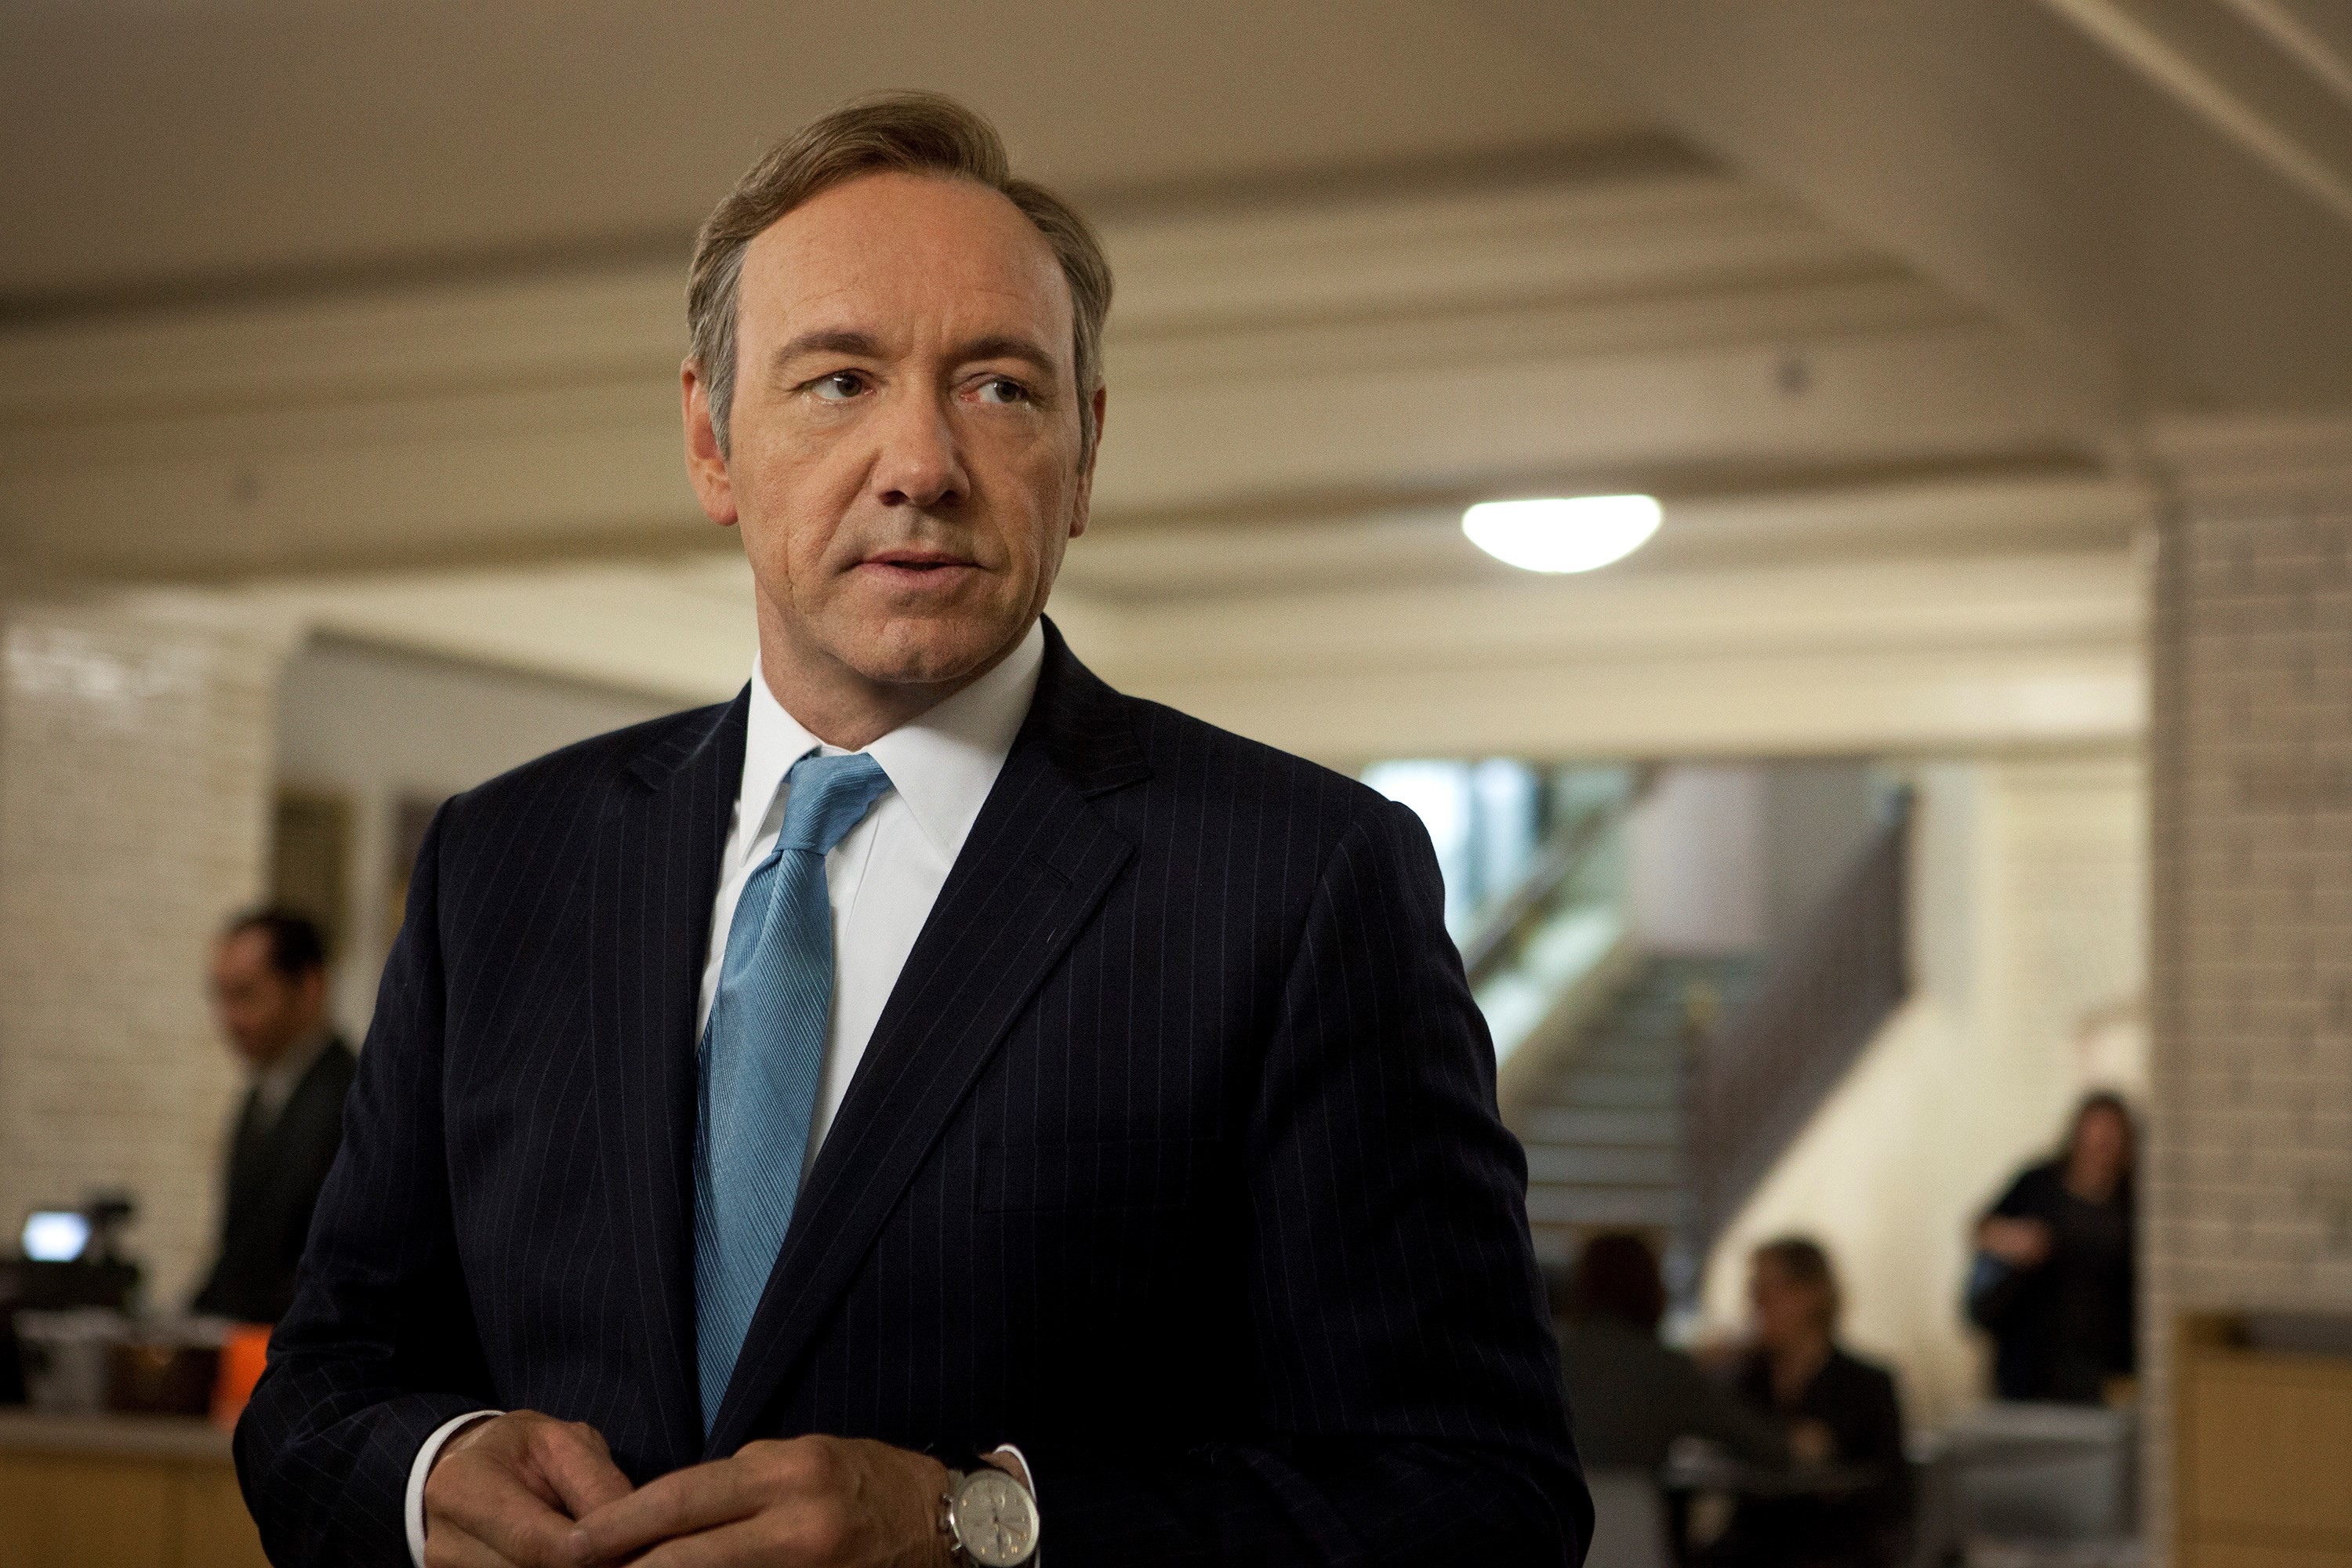 High resolution wallpapers widescreen house of cards